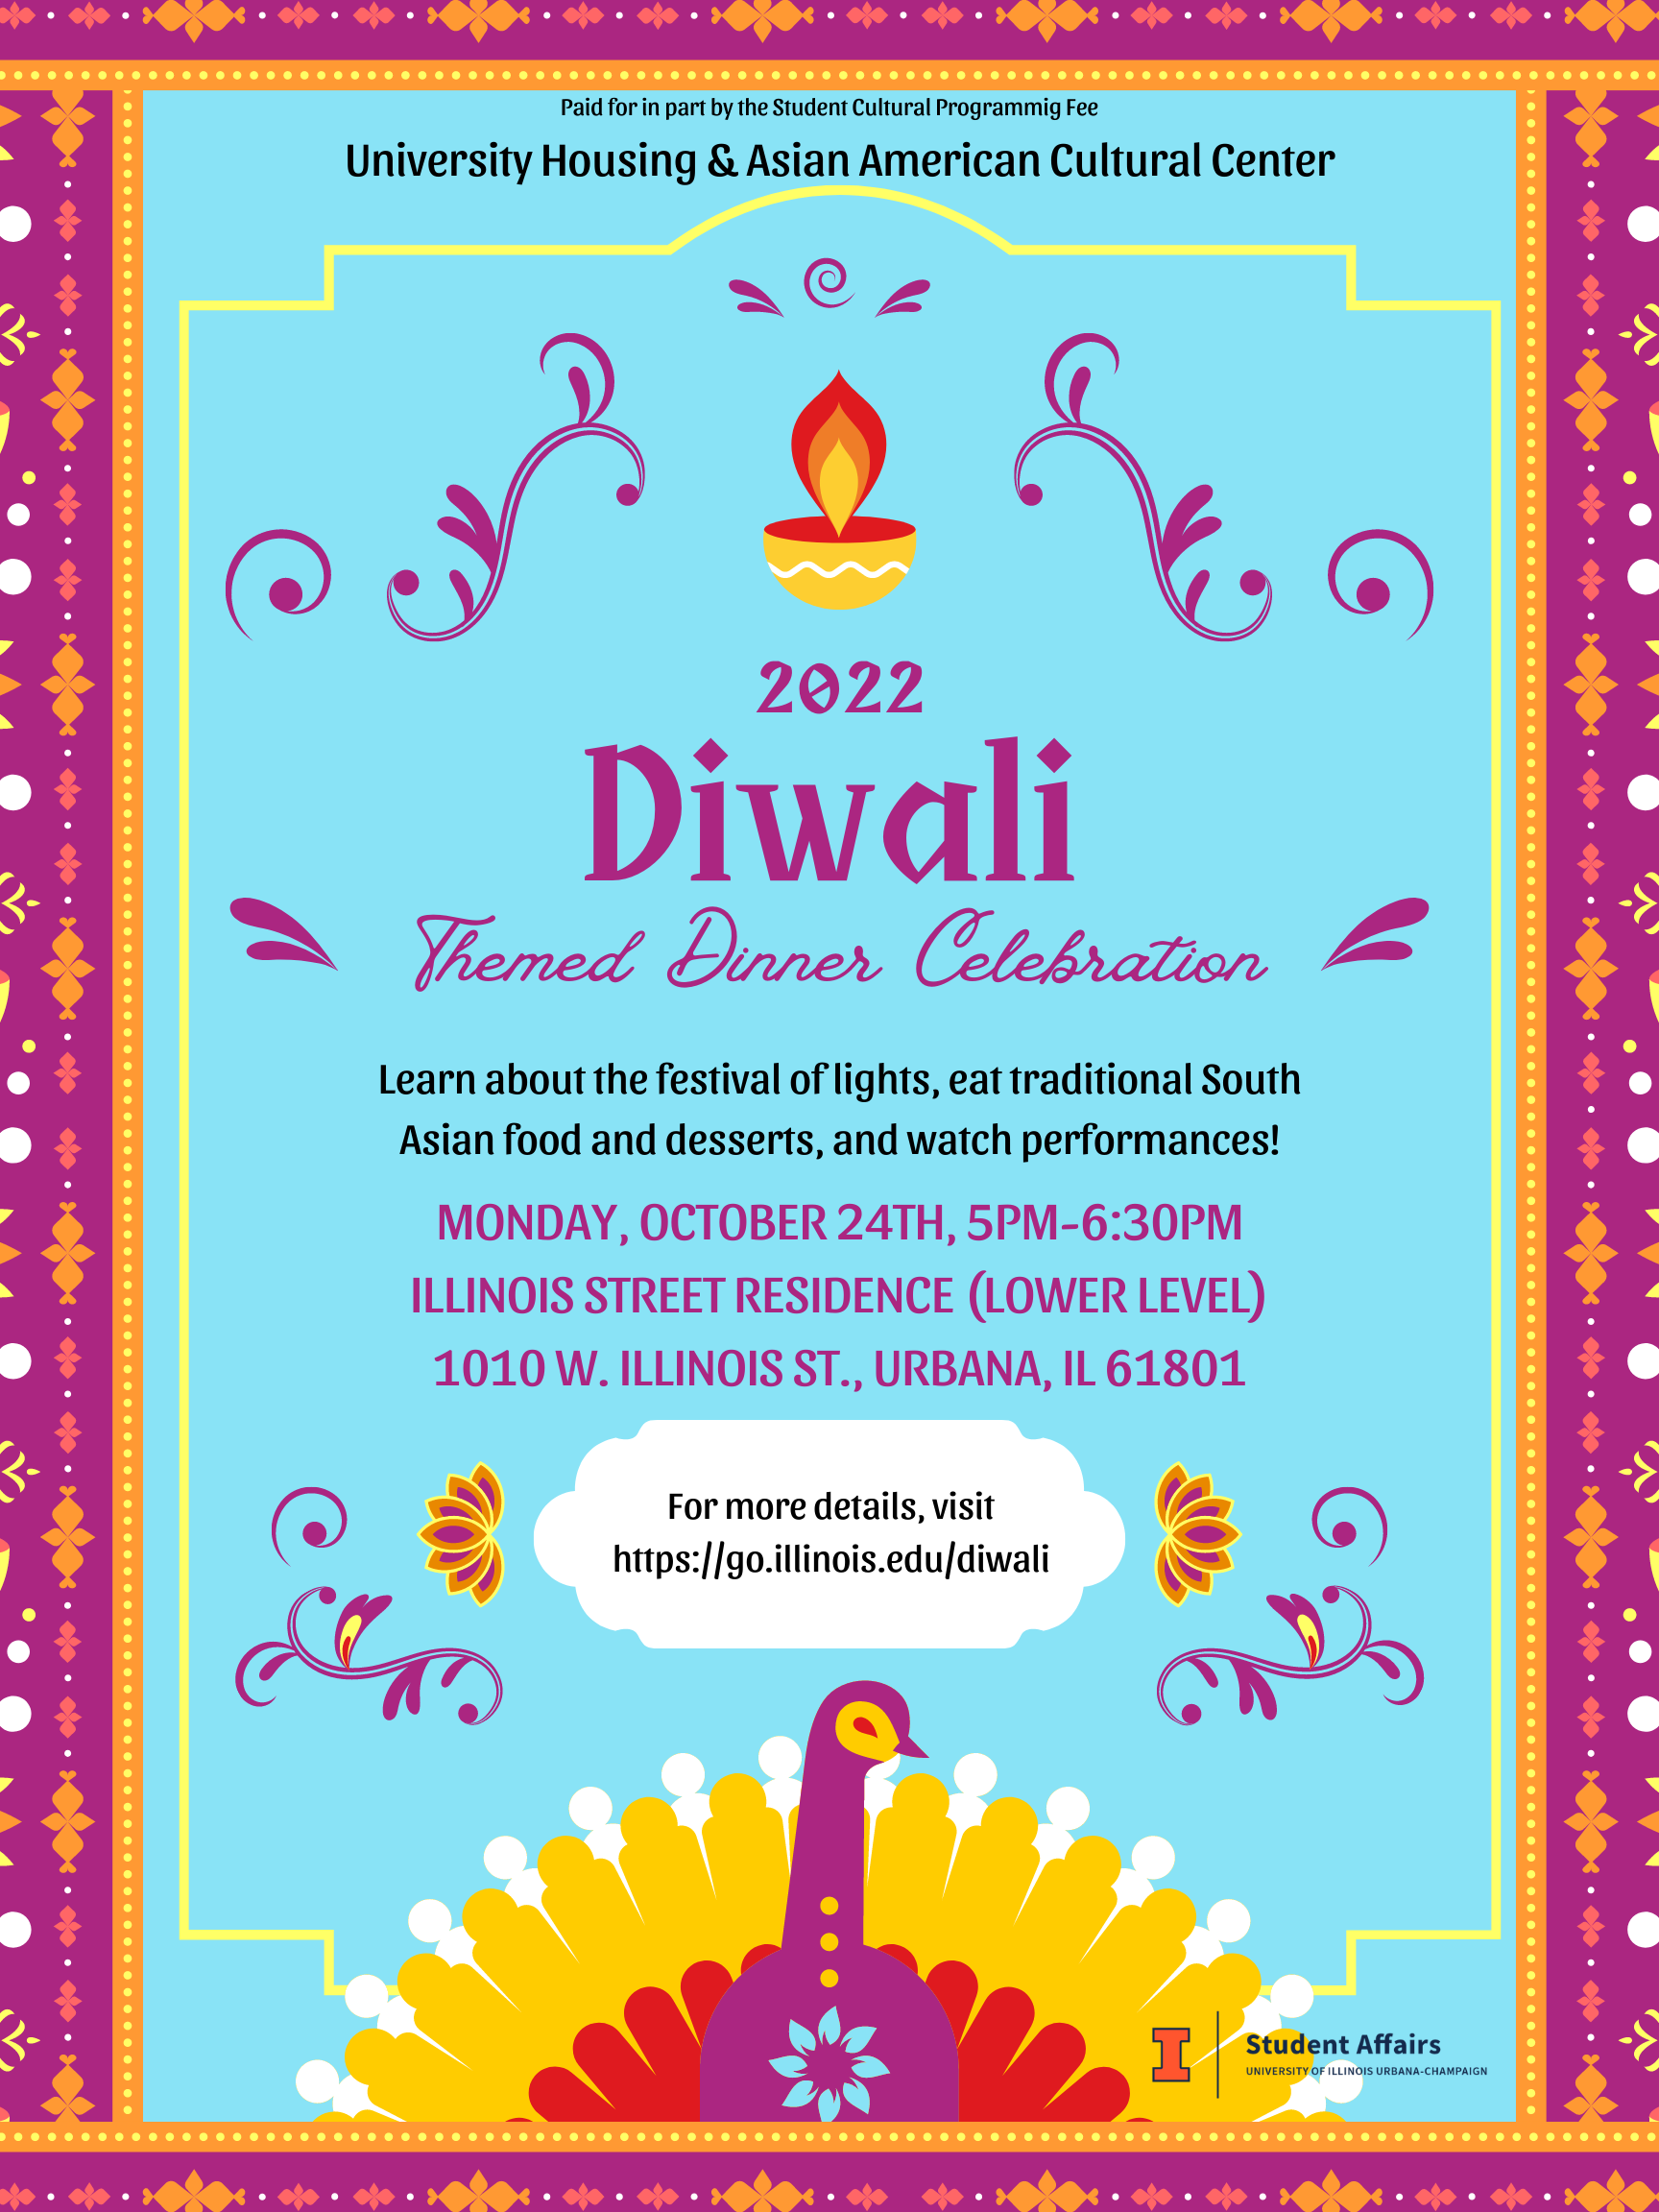 cc Diwali 22 1 Png Office Of Inclusion And Intercultural Relations University Of Illinois At Urbana Champaign